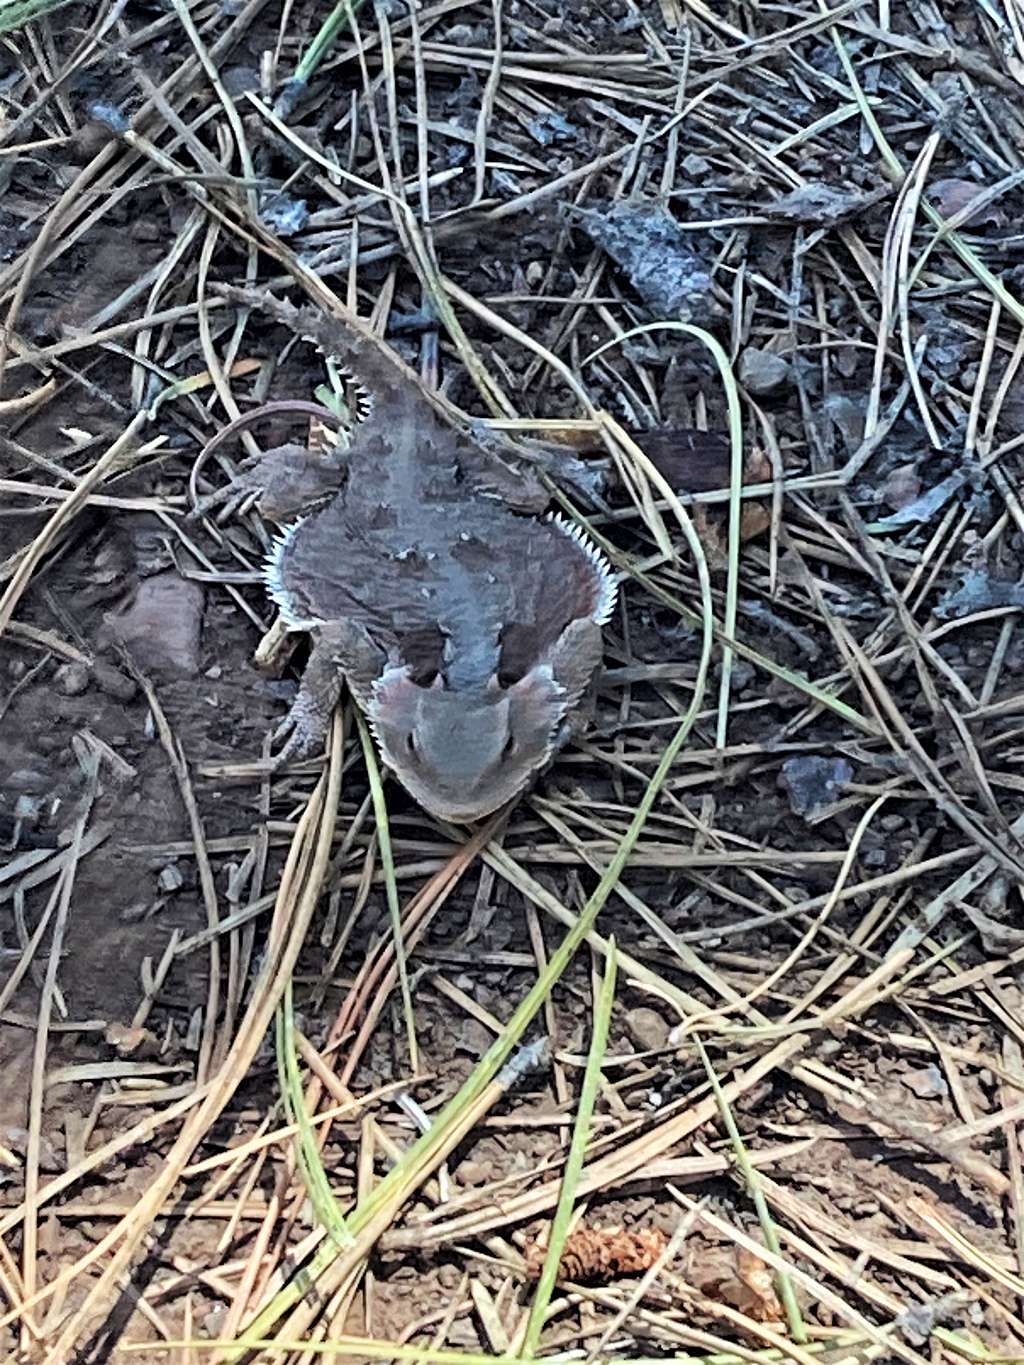 Horned toad near the summit